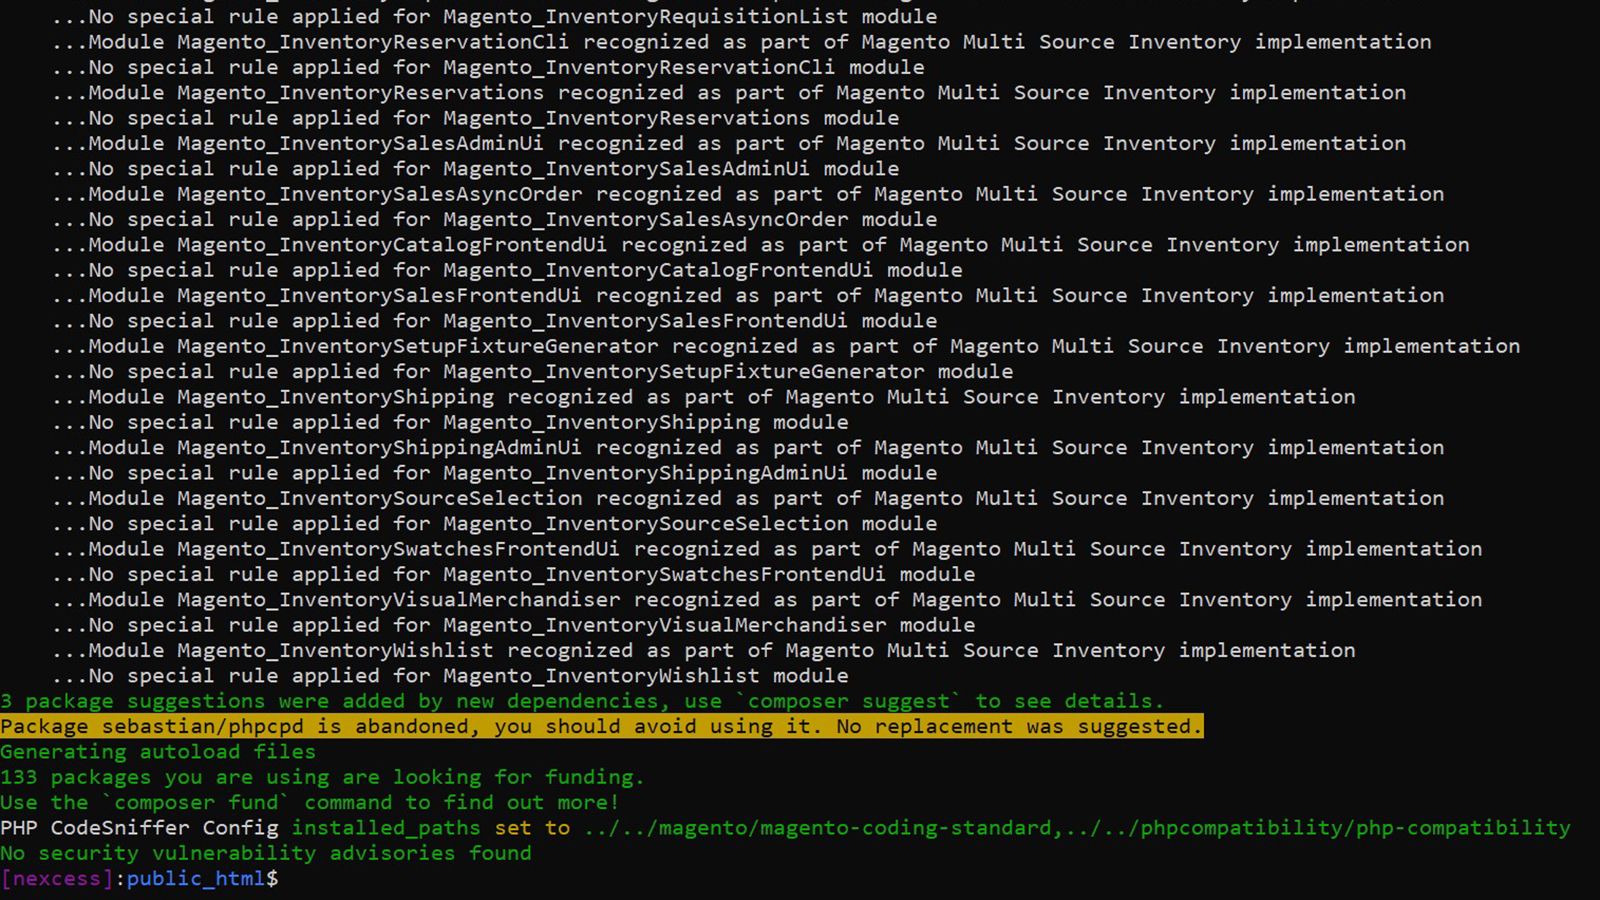 Screenshot of the CLI showing the output of the composer update command.